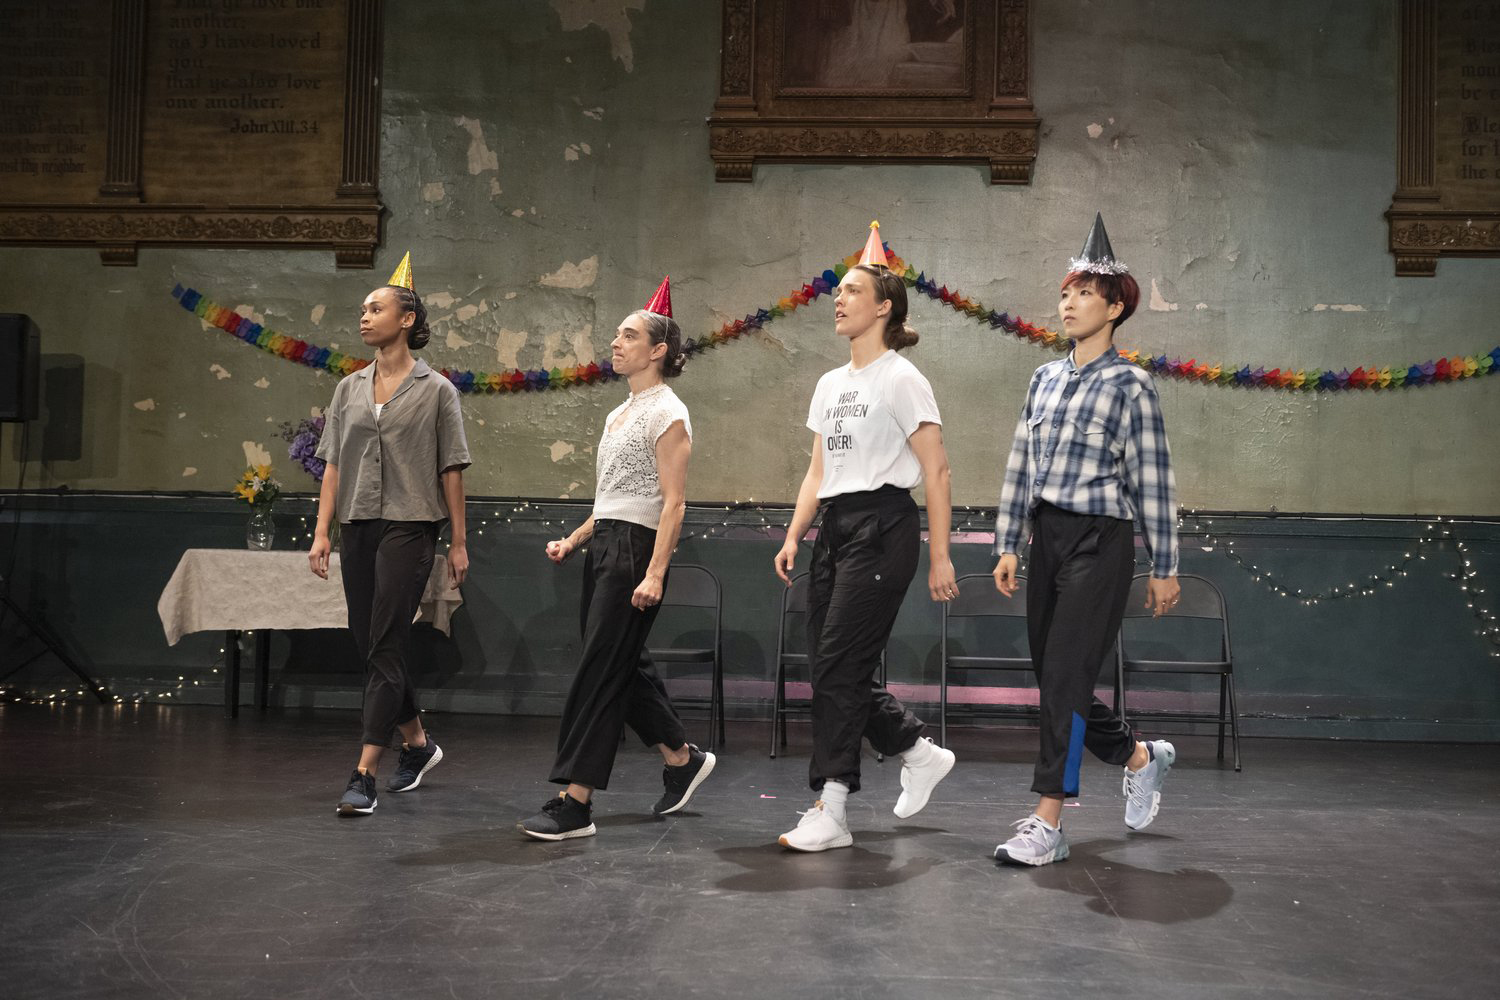 four dancers standing side by side on stage wearing party hats